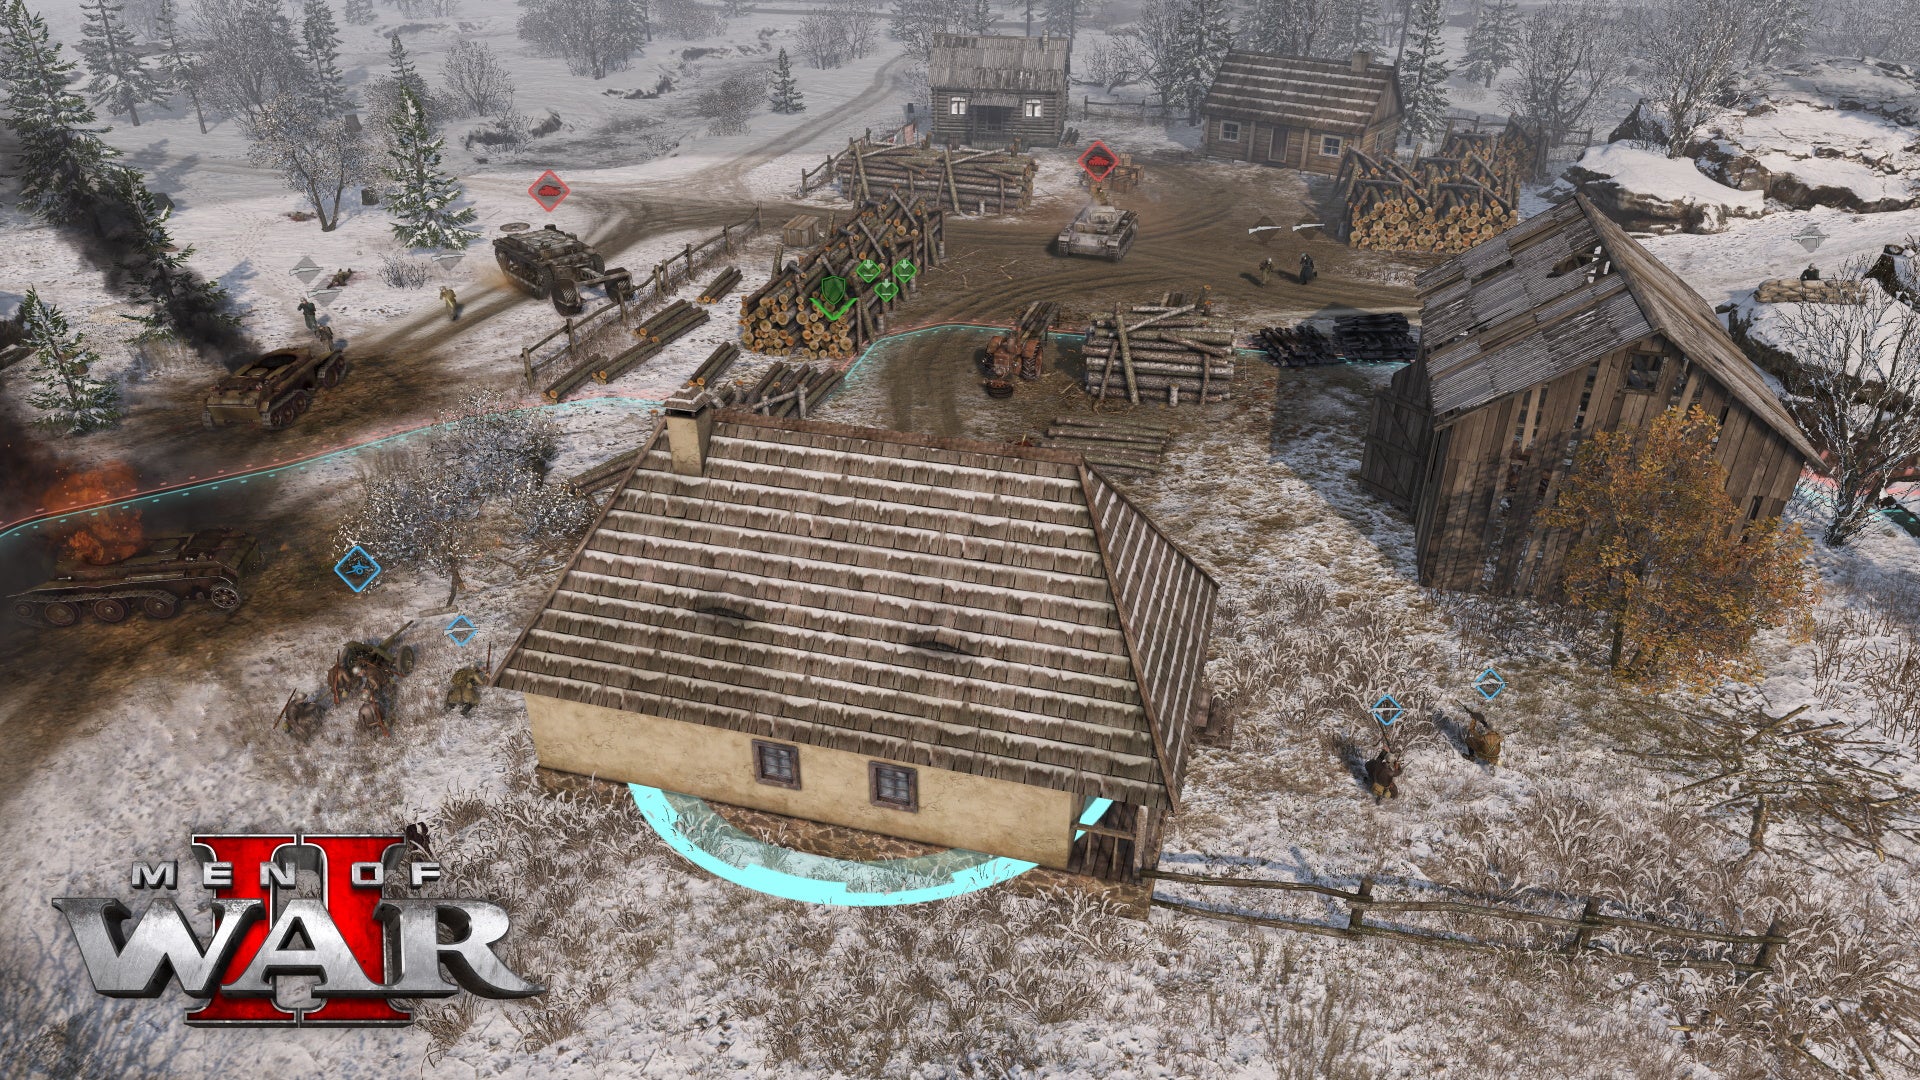 Soldiers and tanks fight near an abandoned house in the snow in Men of War 2